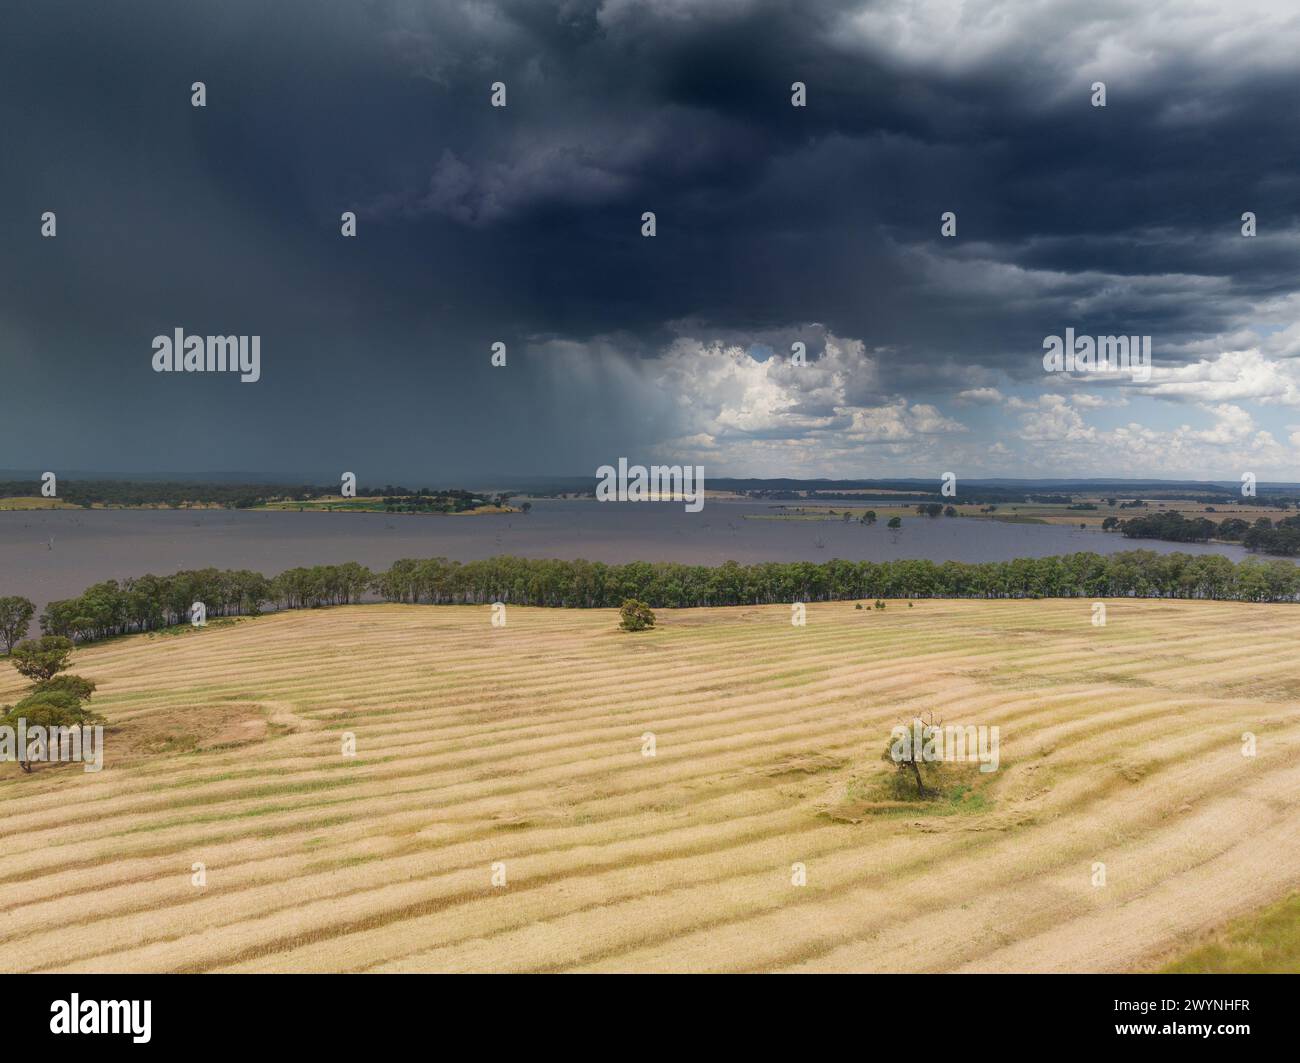 Aerial view of rain falling from dark storm clouds moving over a reservoir behind a dry harvested field at Joyces Creek in Central Victoria, Australia Stock Photo